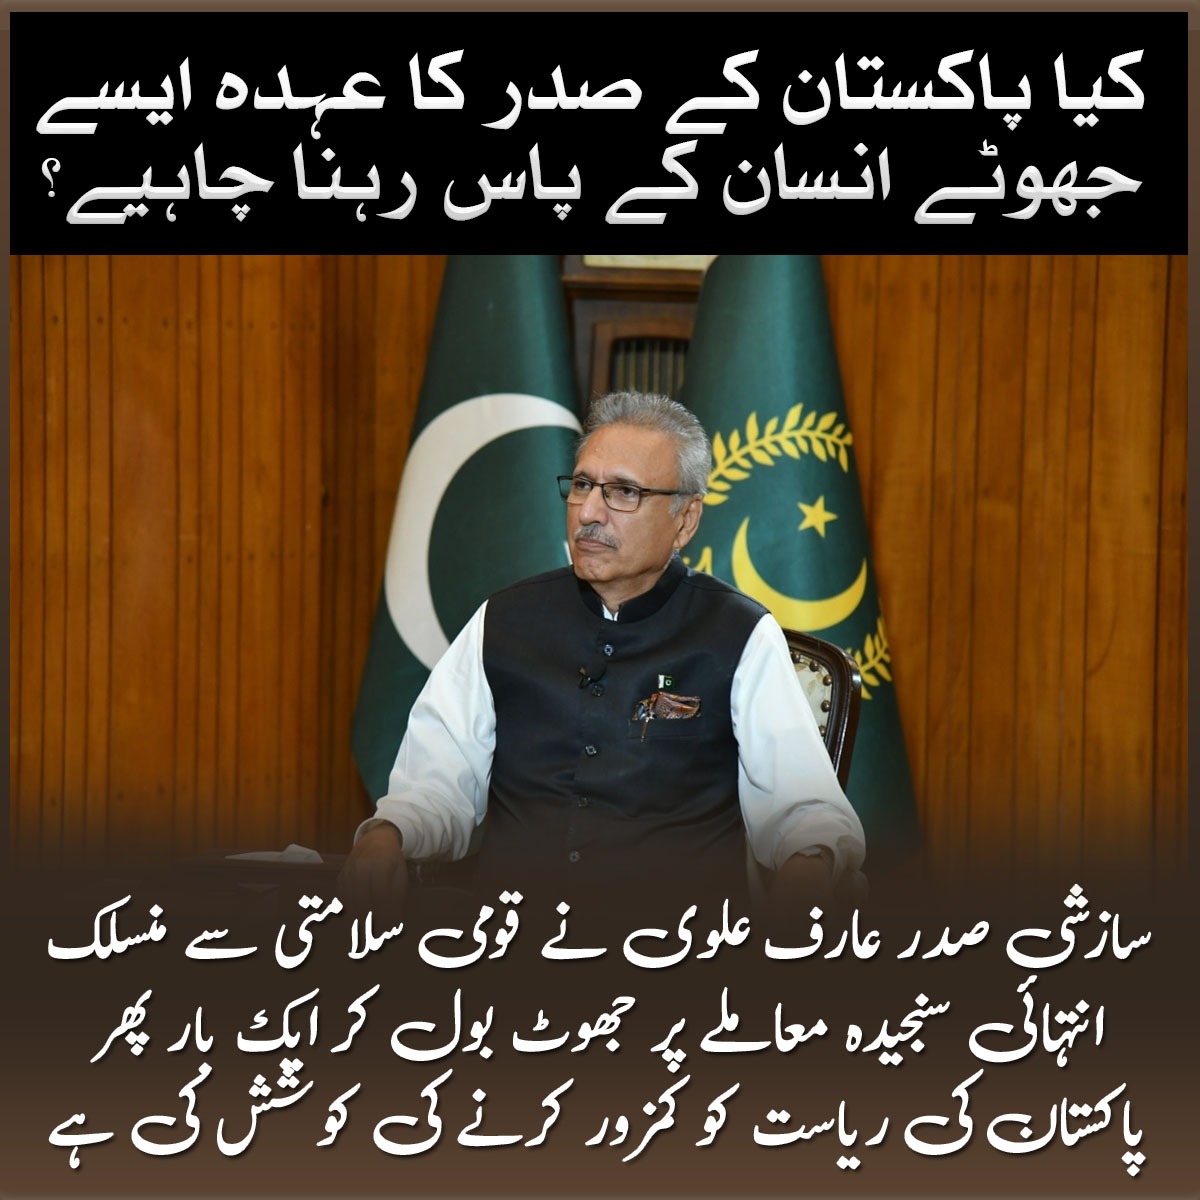 Pakistan's constitutional framework demands adherence to principles, not political affiliations. The President's move requires thorough examination for its implications. #فتنہ_علوی_نامنظور